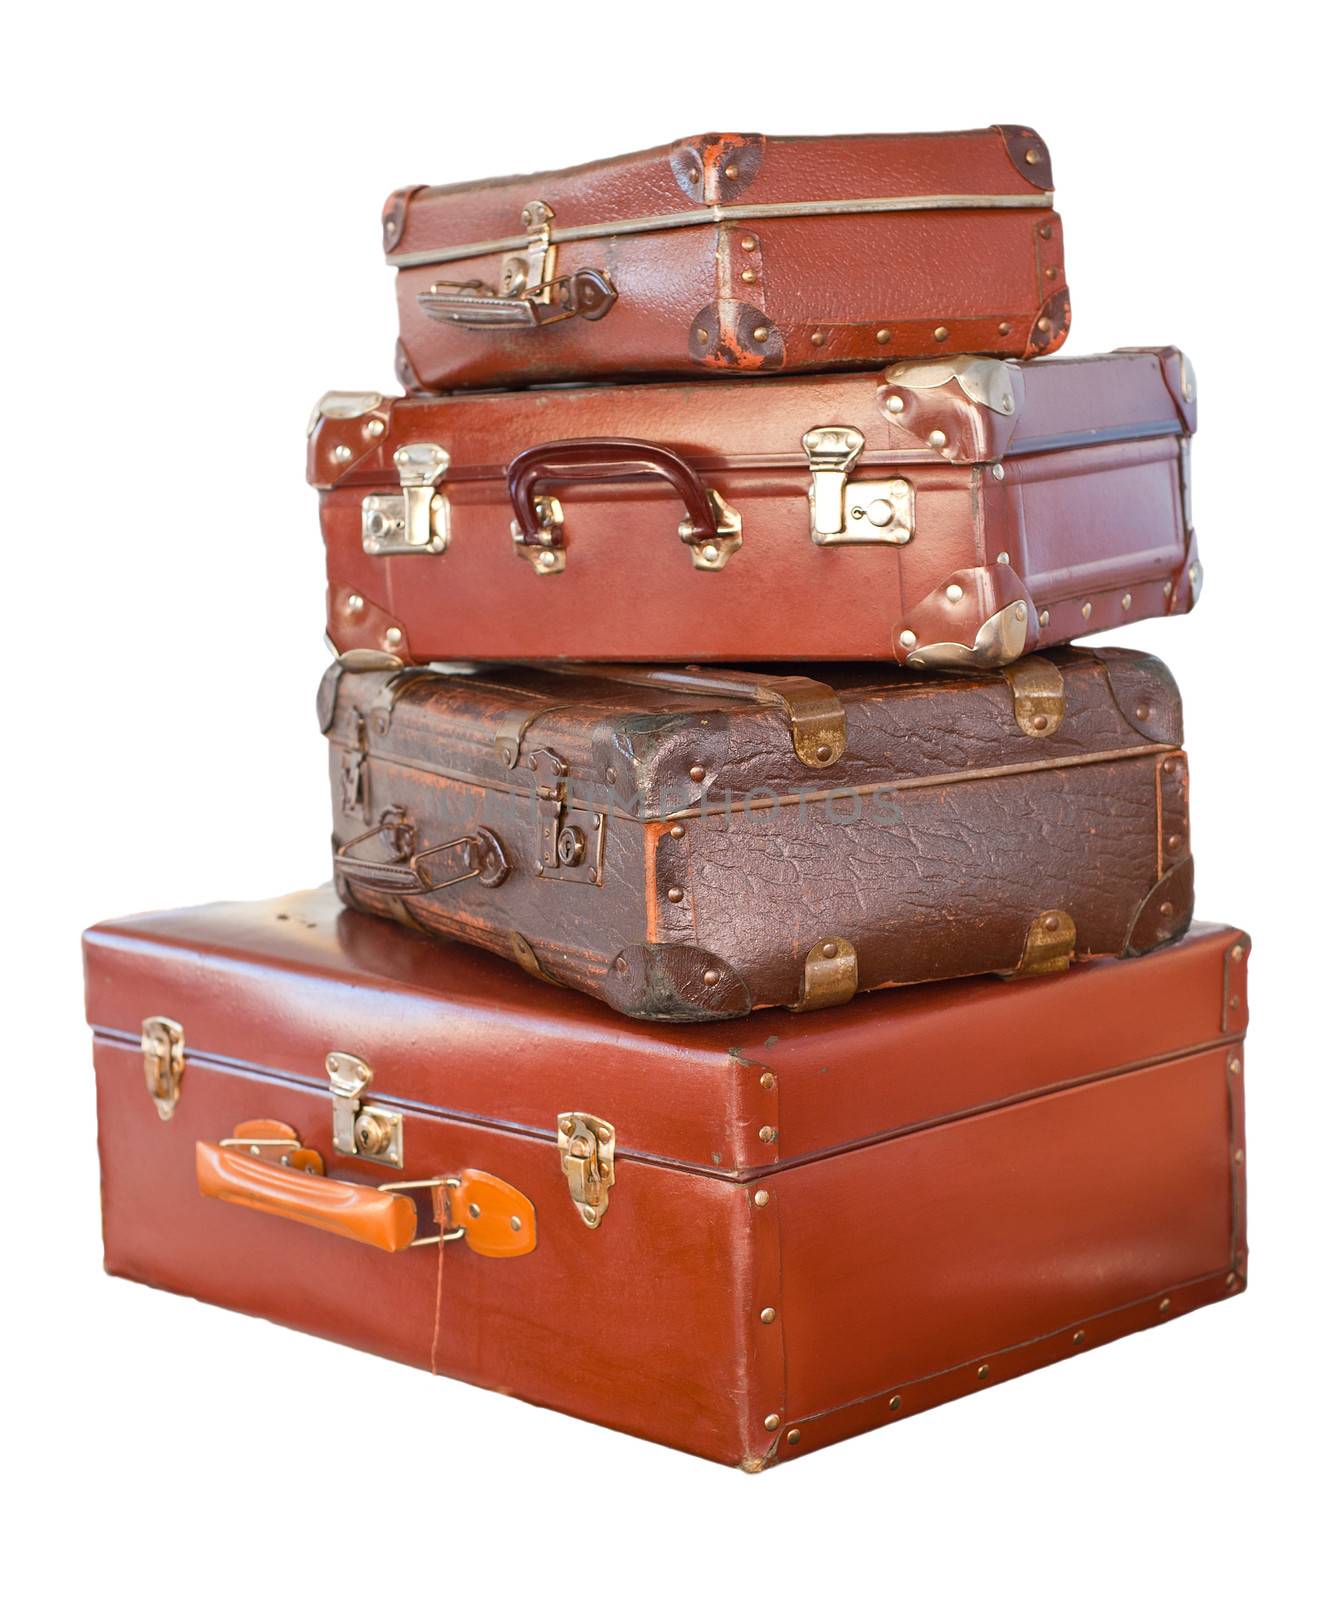 Vintage weathered leather suitcases on top of each other